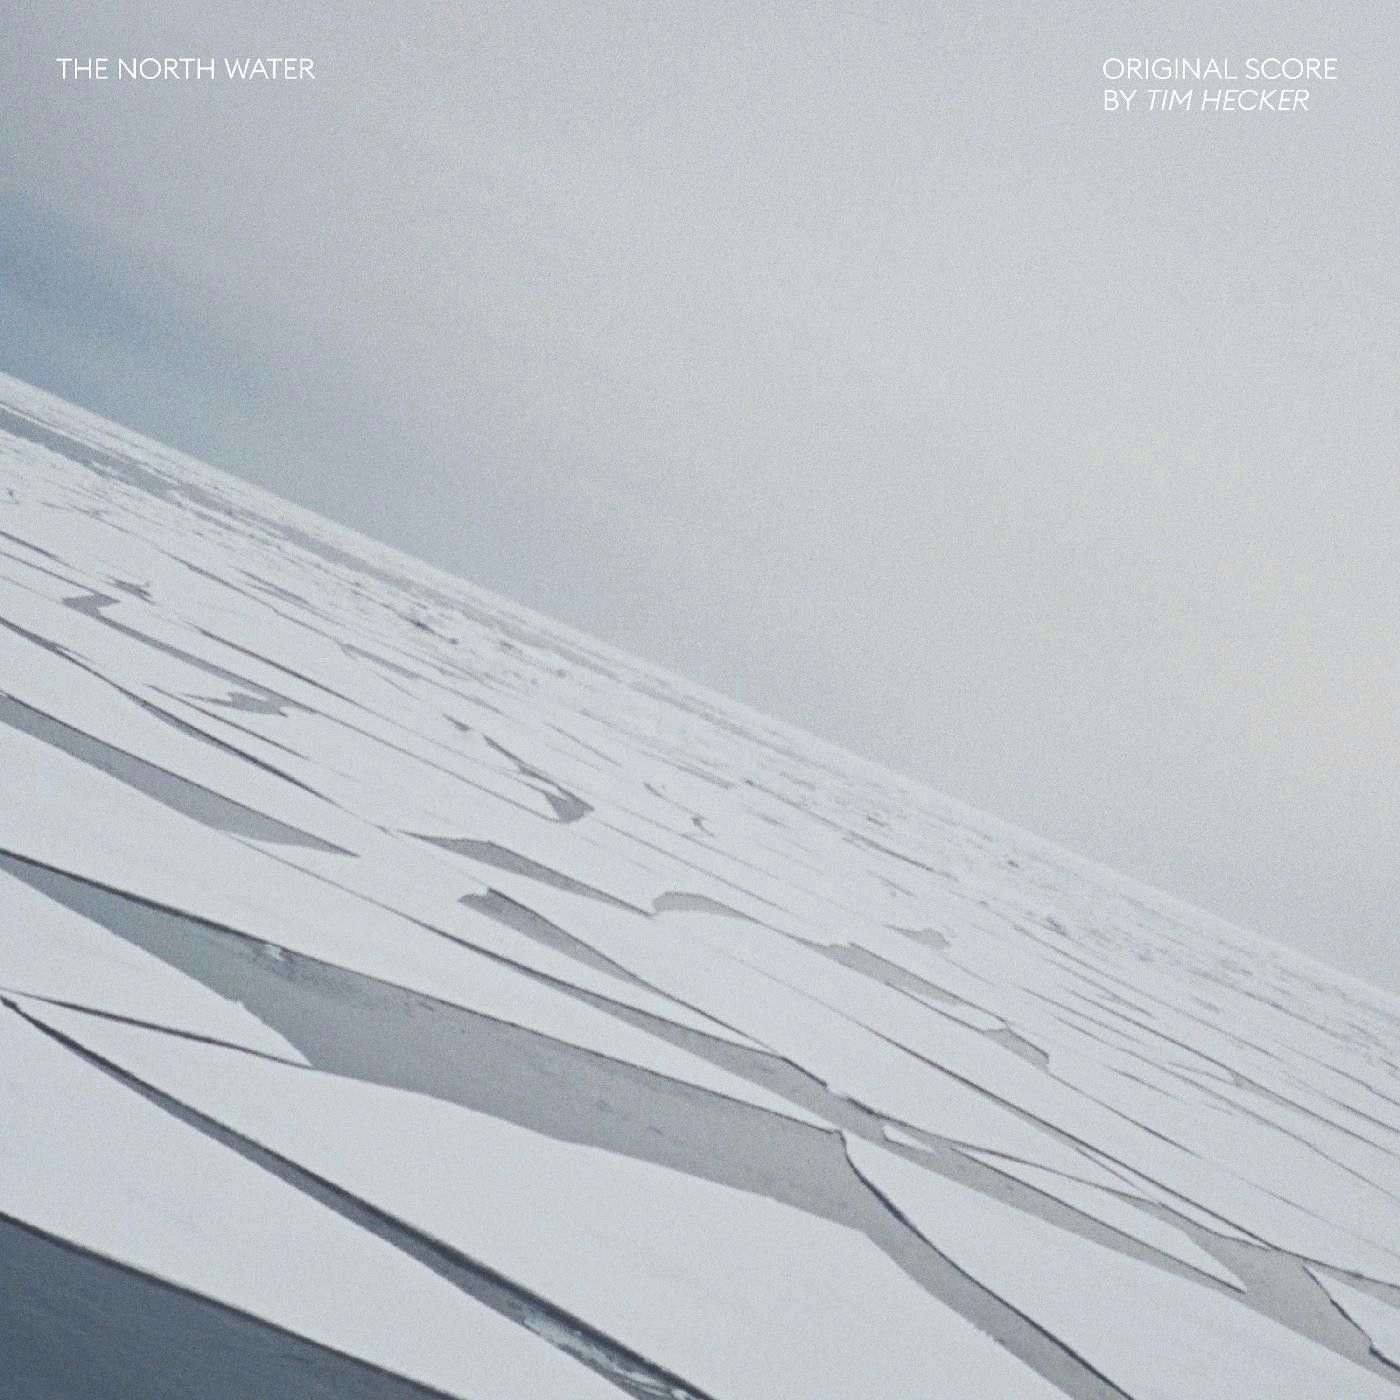 Album artwork for Album artwork for The North Water (Original Score) by Tim Hecker by The North Water (Original Score) - Tim Hecker